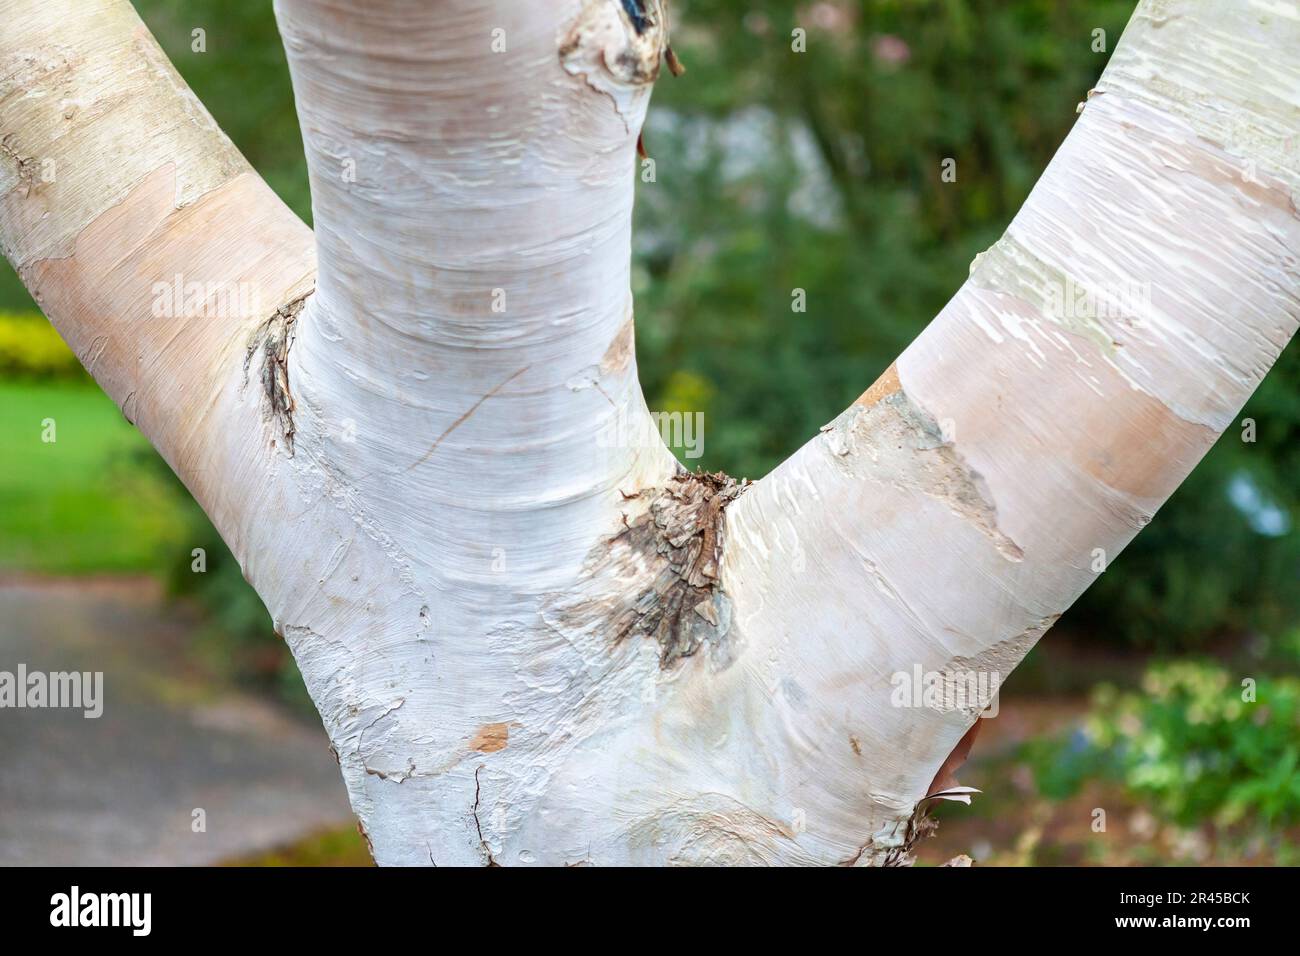 Close-up of a tree-trunk and lower branches: Himalayan birch (Betula utilis var. jacquemontii) in RHS Rosemoor, Devon, UK Stock Photo